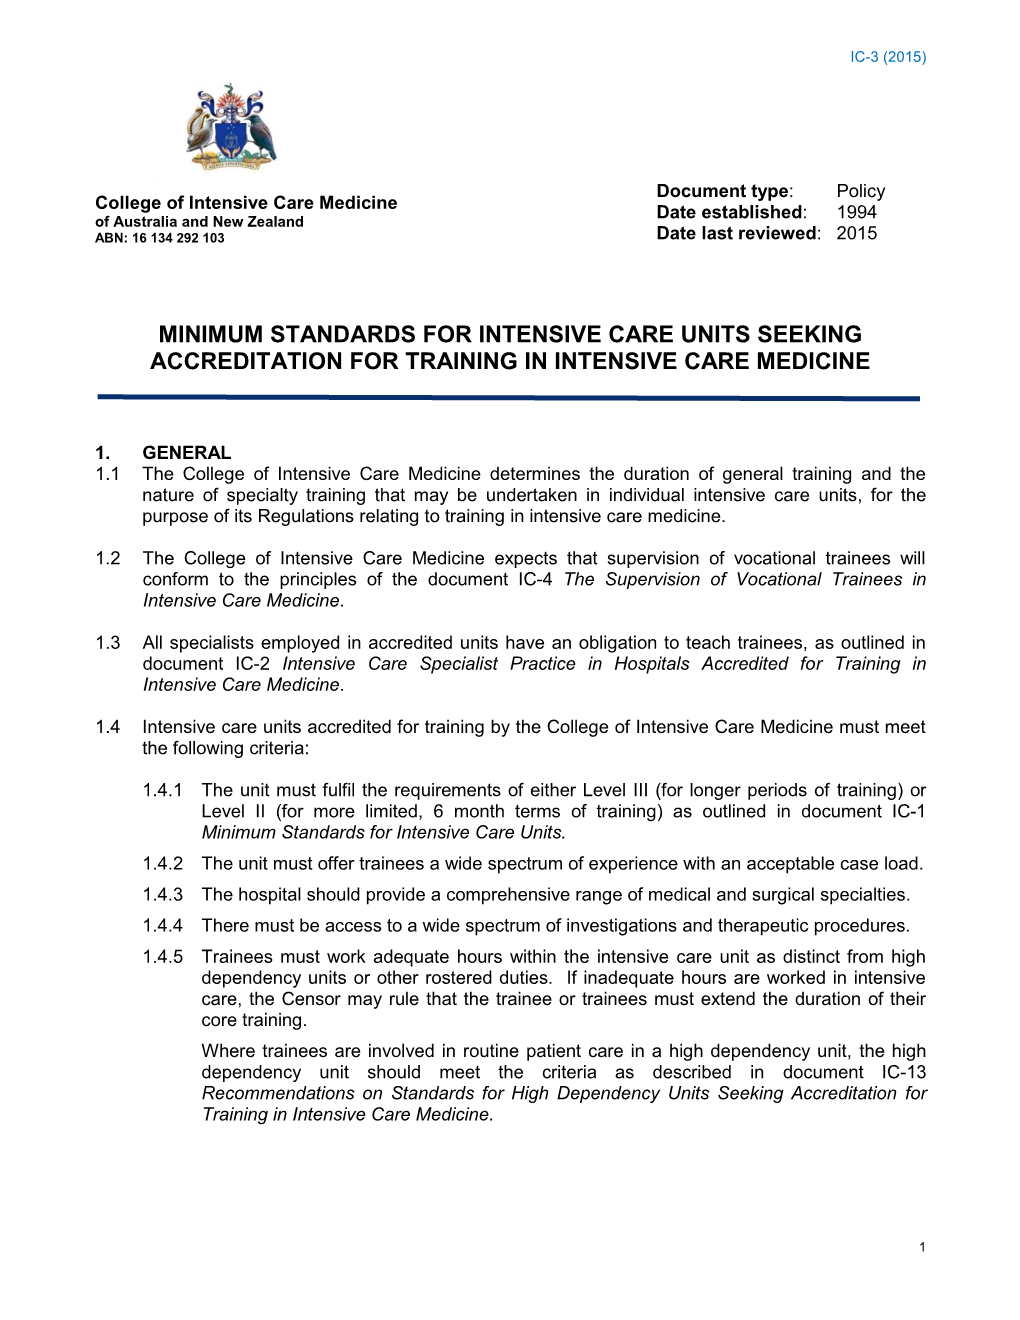 Minimum Standards for Intensive Care Units Seeking Accreditation for Training in Intensive Care Medicine